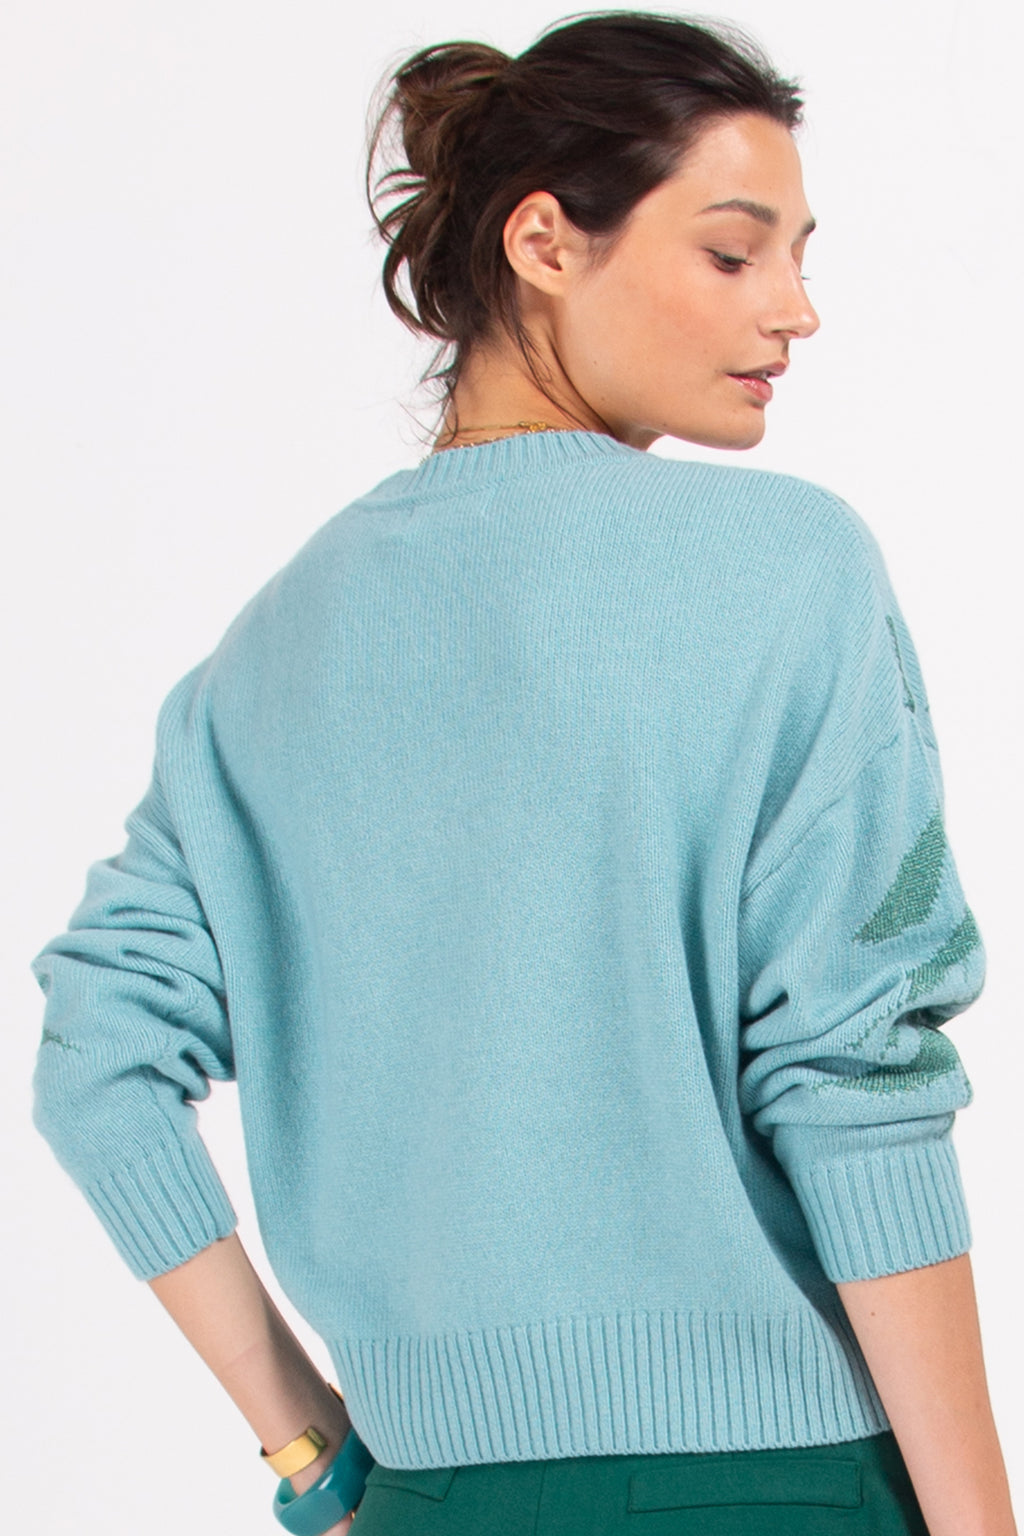 Mata knitted sweater with teal leaf